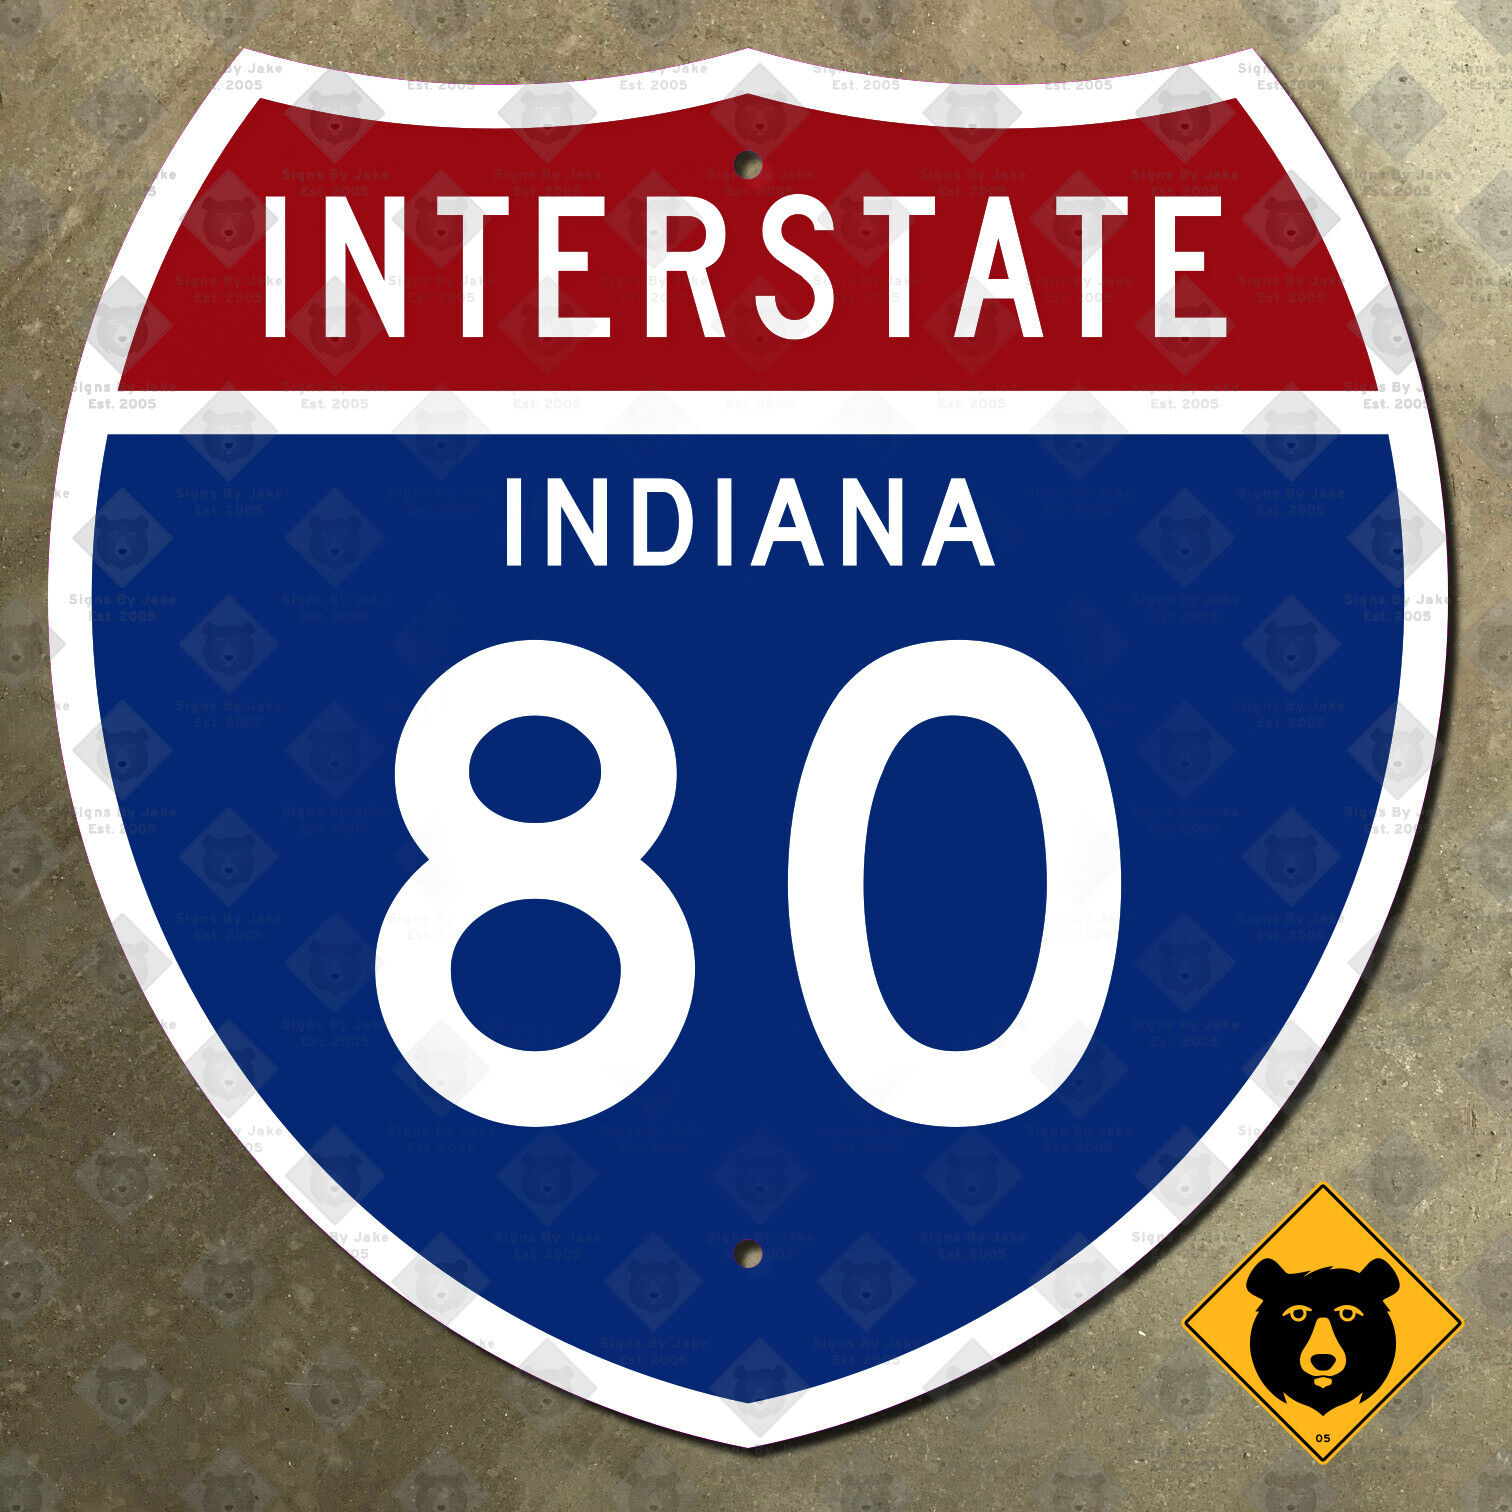 Indiana Interstate 80 highway route marker sign 1957 Hammond South Bend 12x12